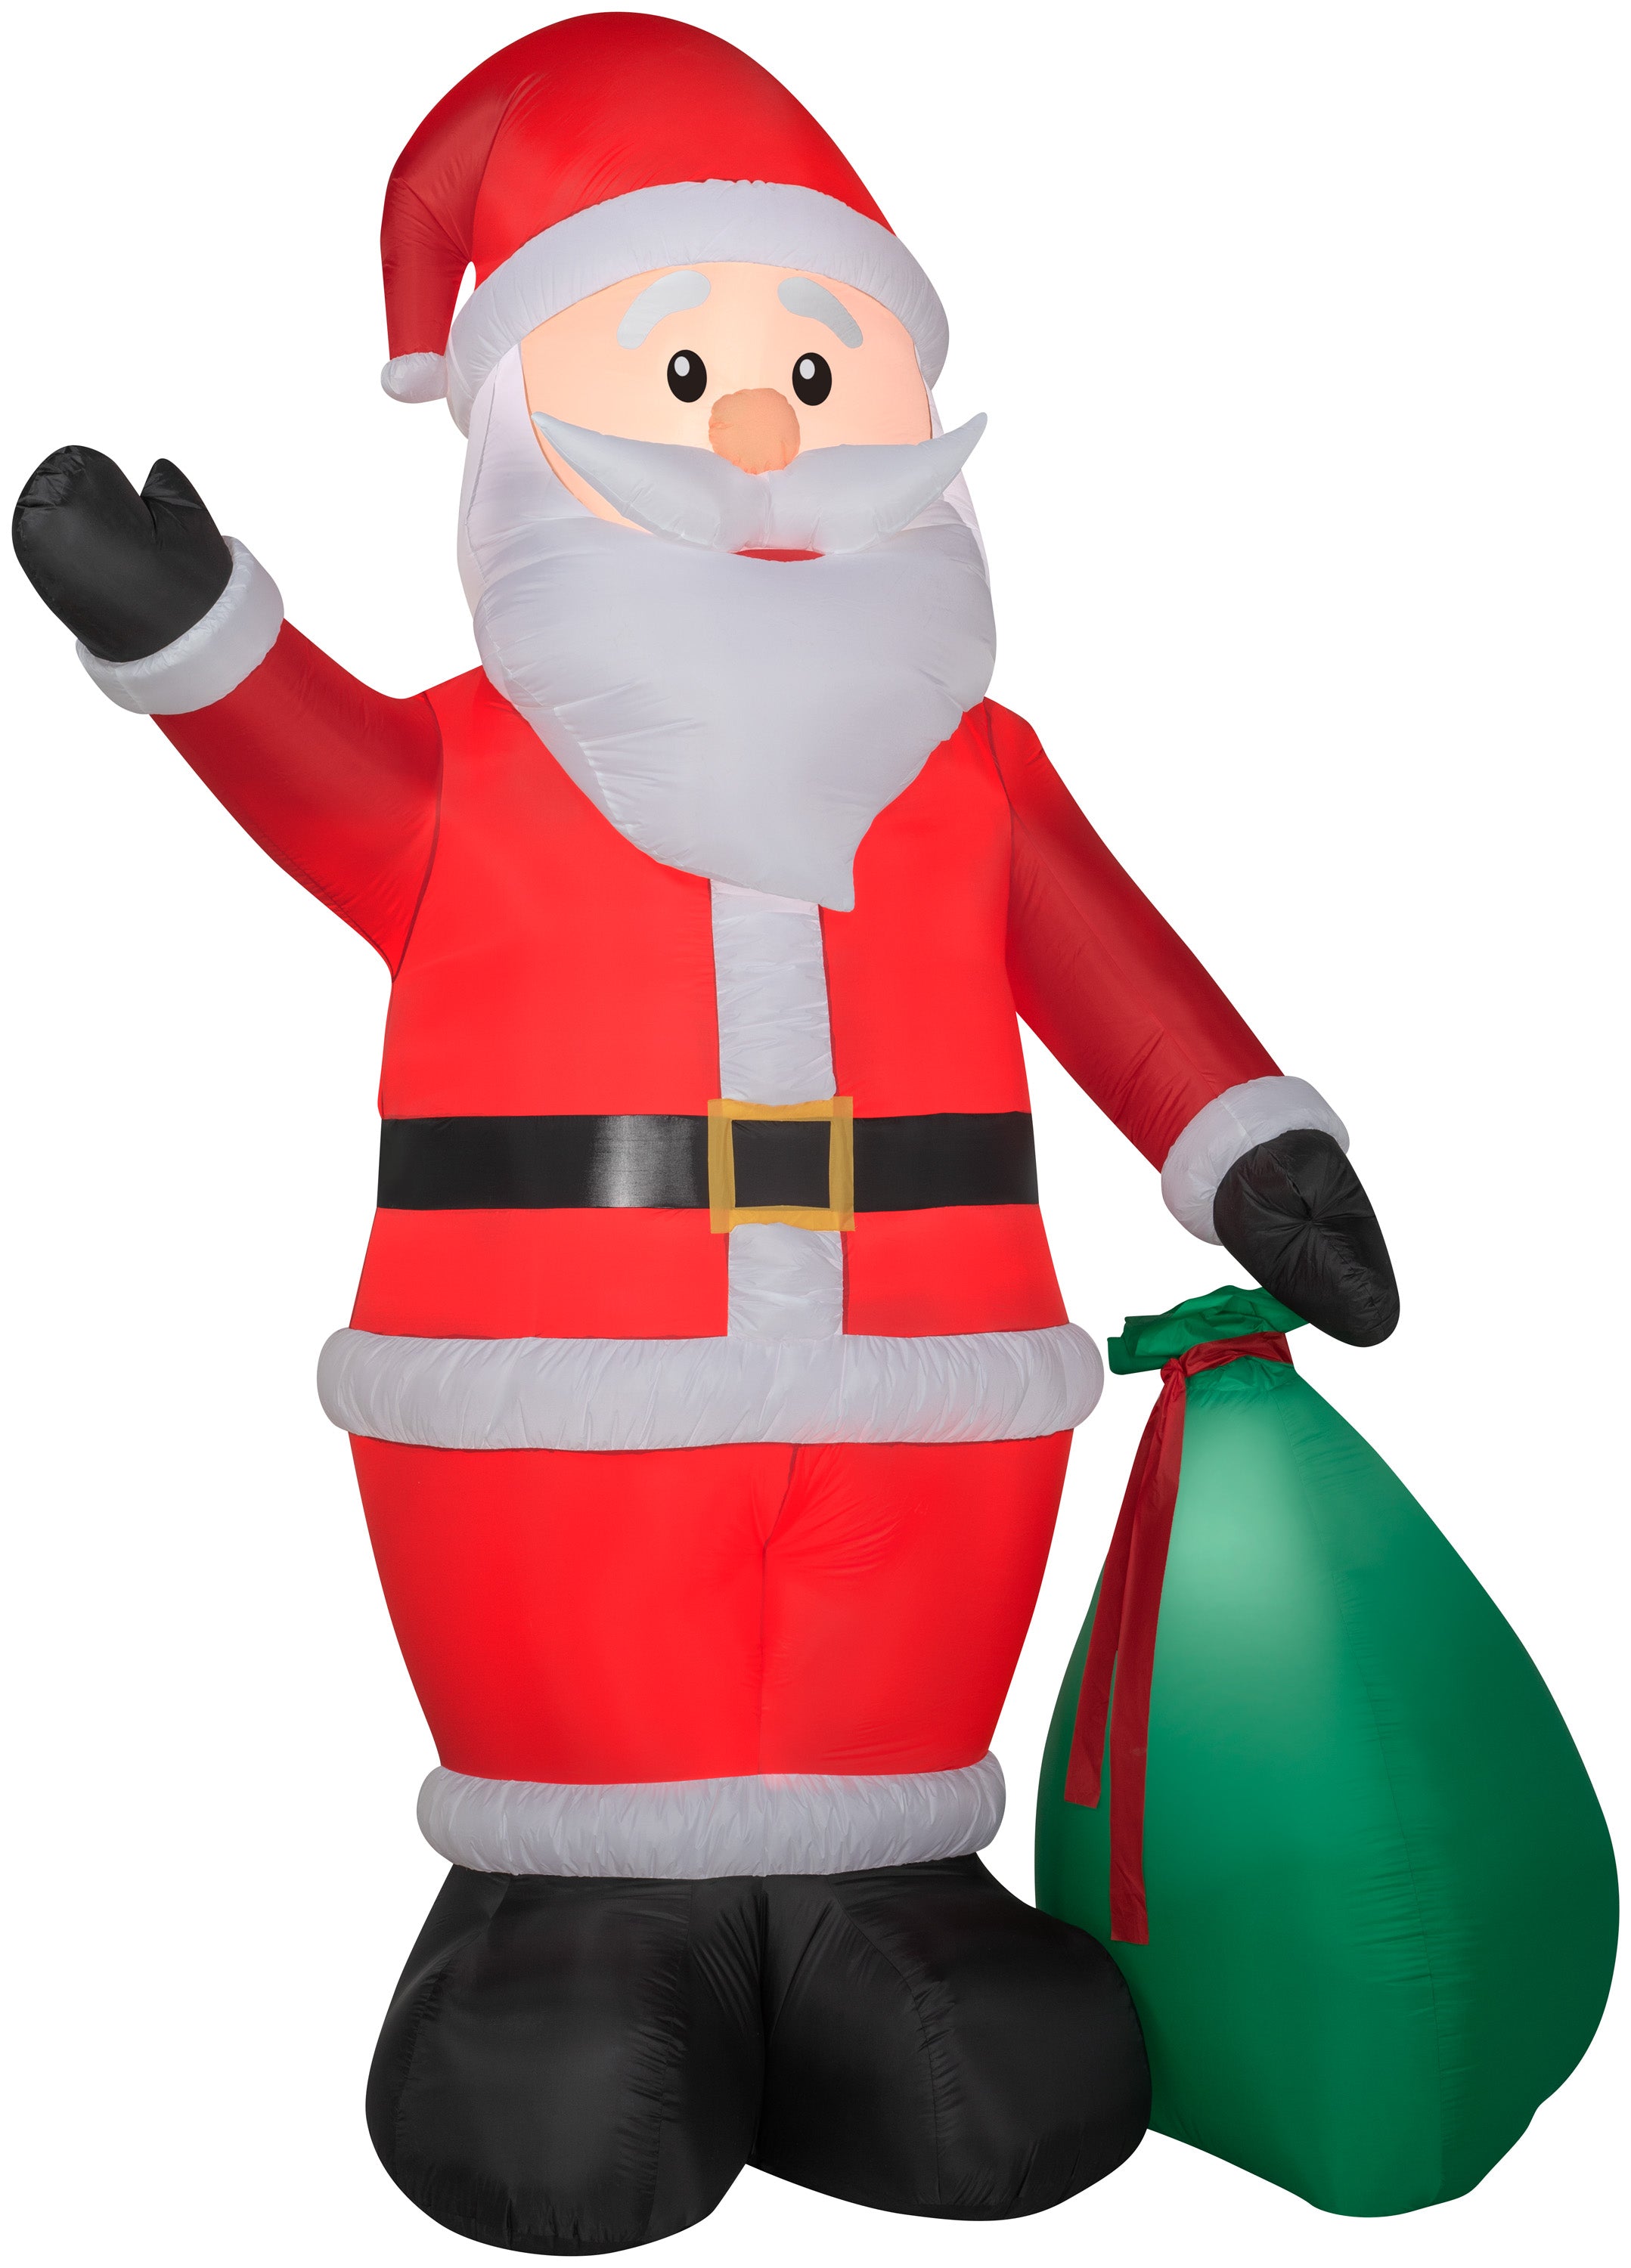 Gemmy Christmas Airblown Inflatable Extra Bright Santa Giant, 12 ft Tall